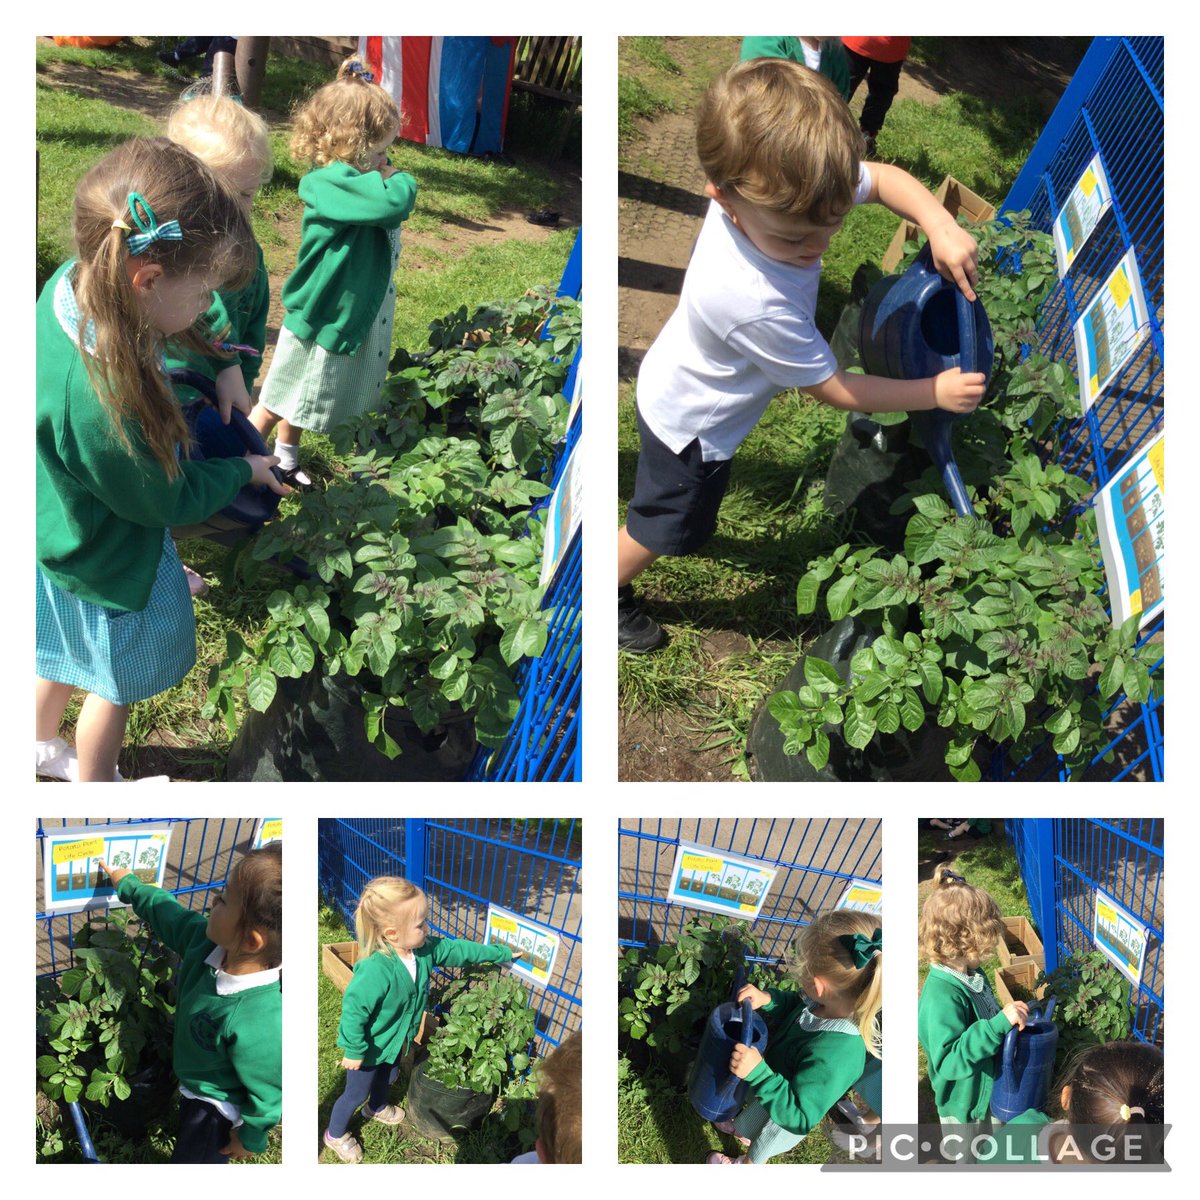 The Nursery children are really enjoying caring for their potato plants. The potatoes have reached stage 3 already! The plants will soon be flowering! Praying for a bountiful crop.